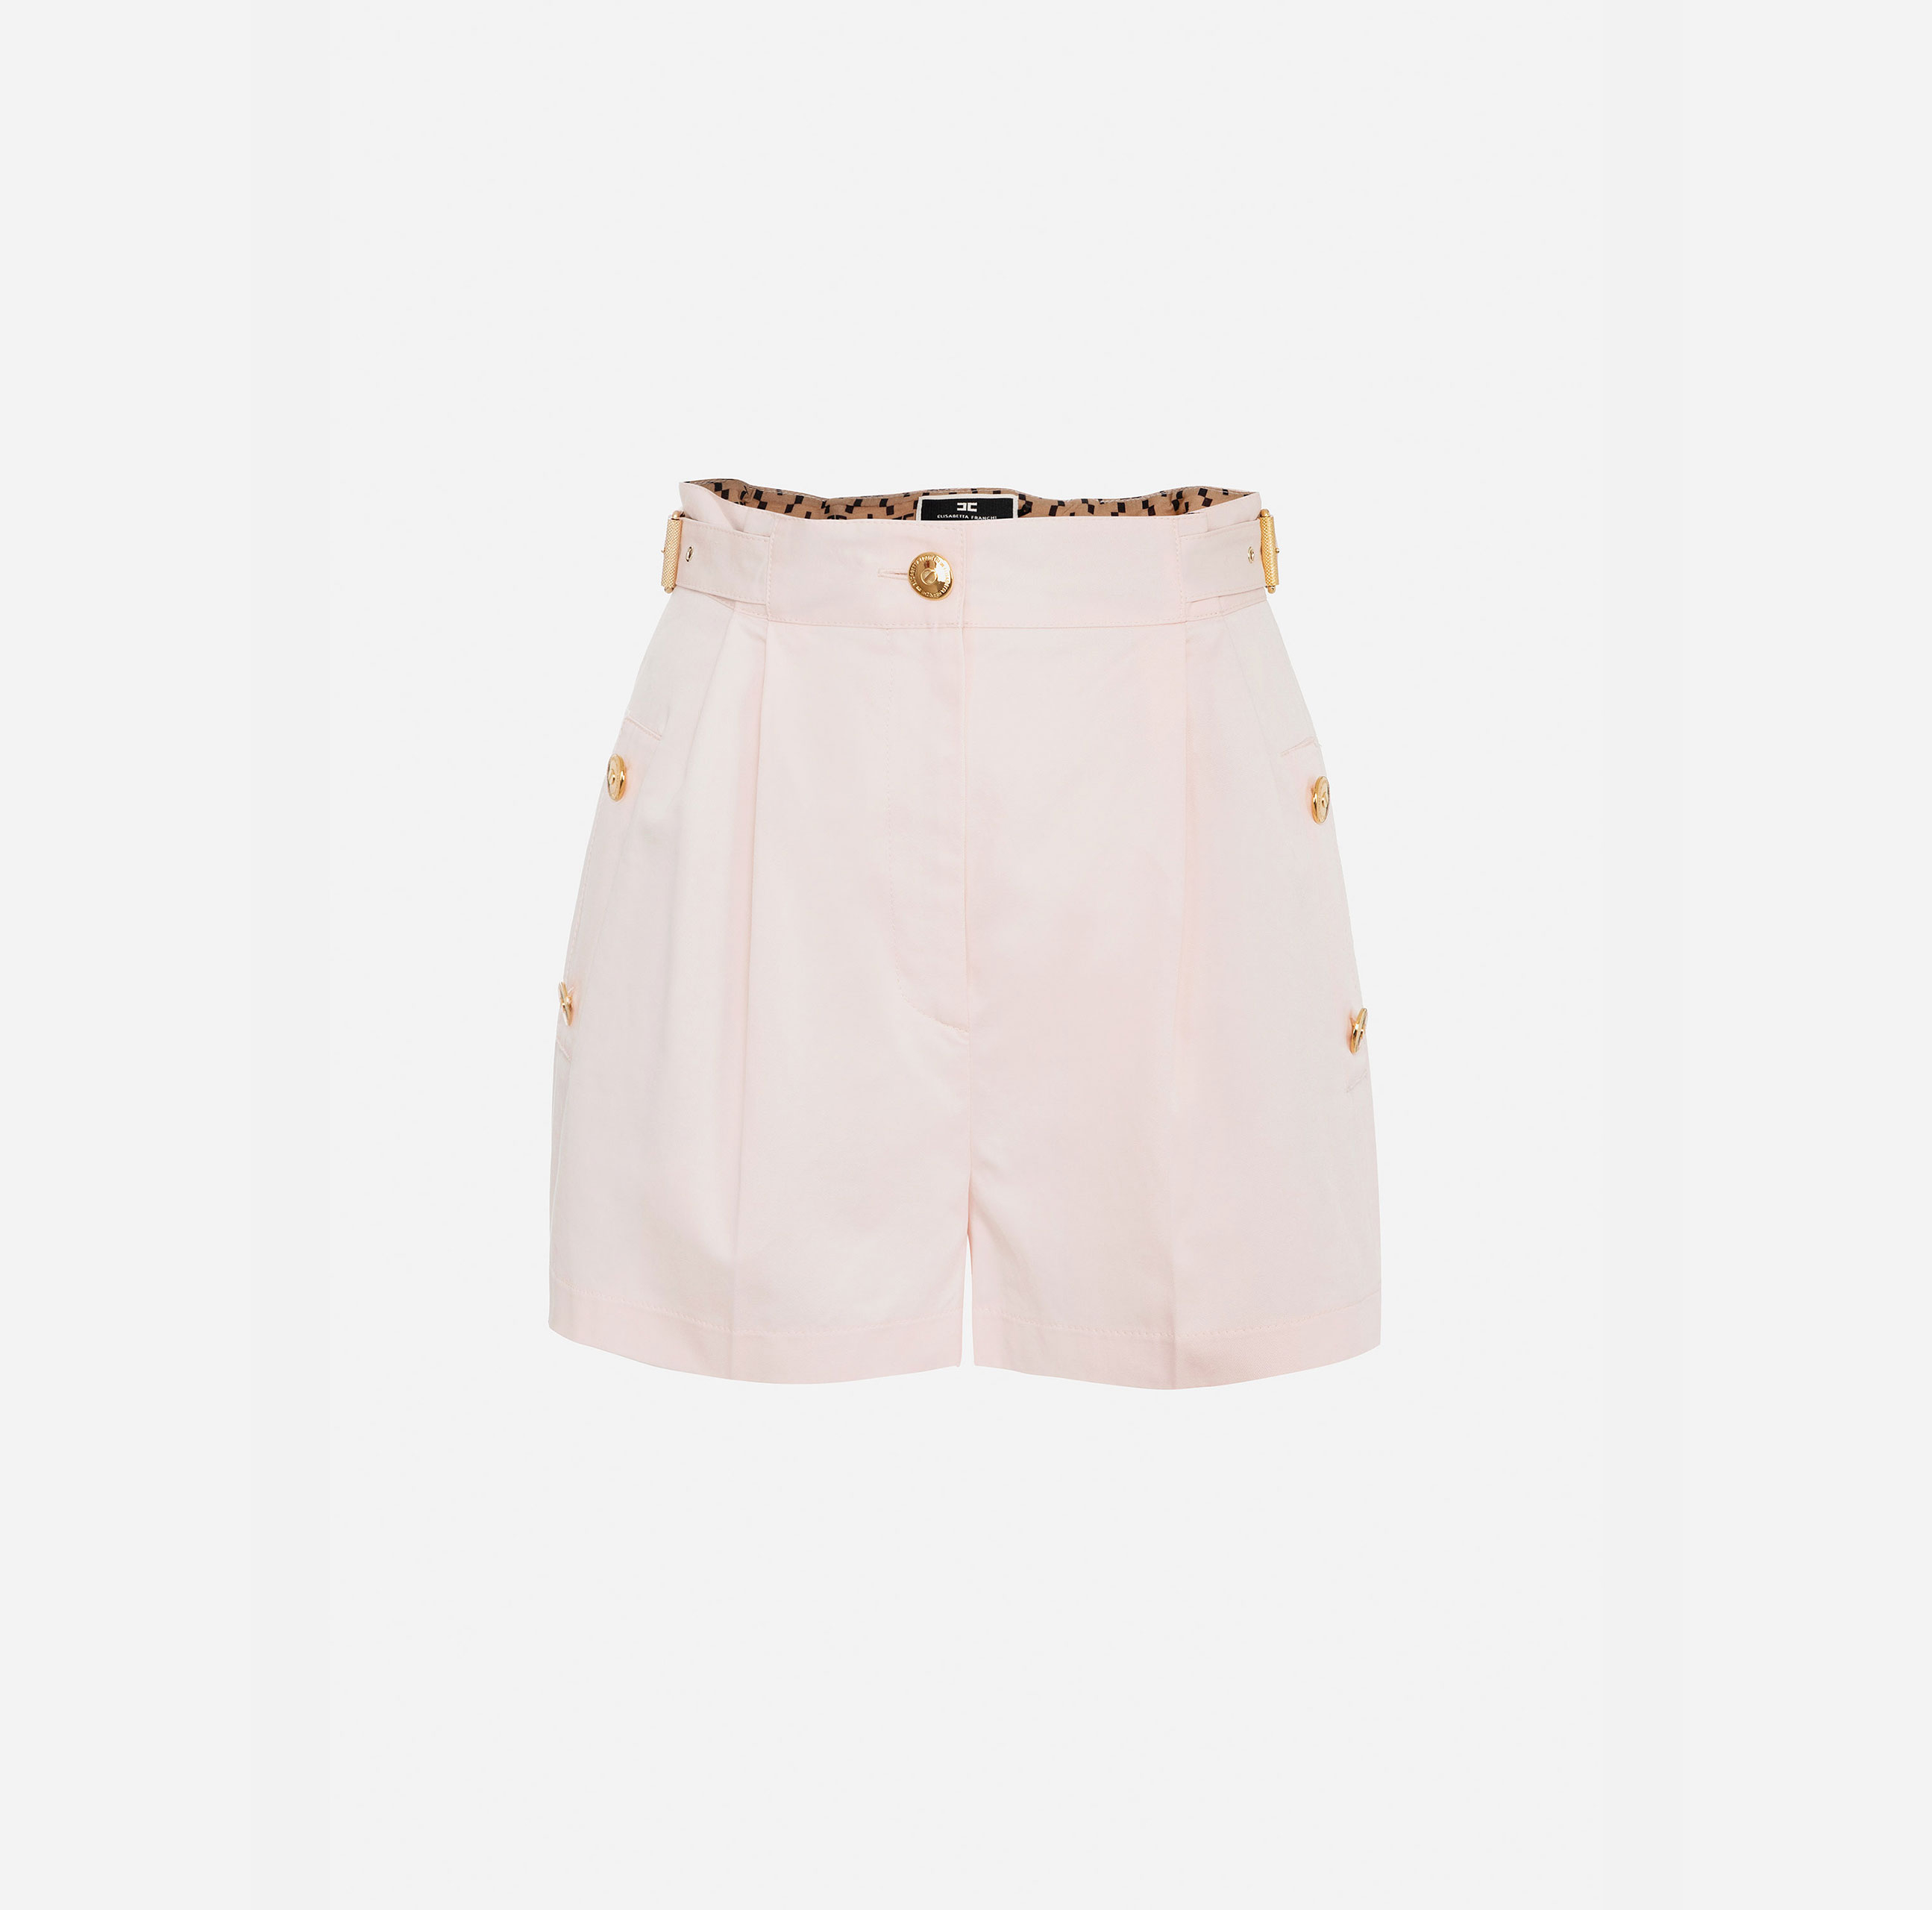 Shorts with waistband and two golden metal buckles - Elisabetta Franchi